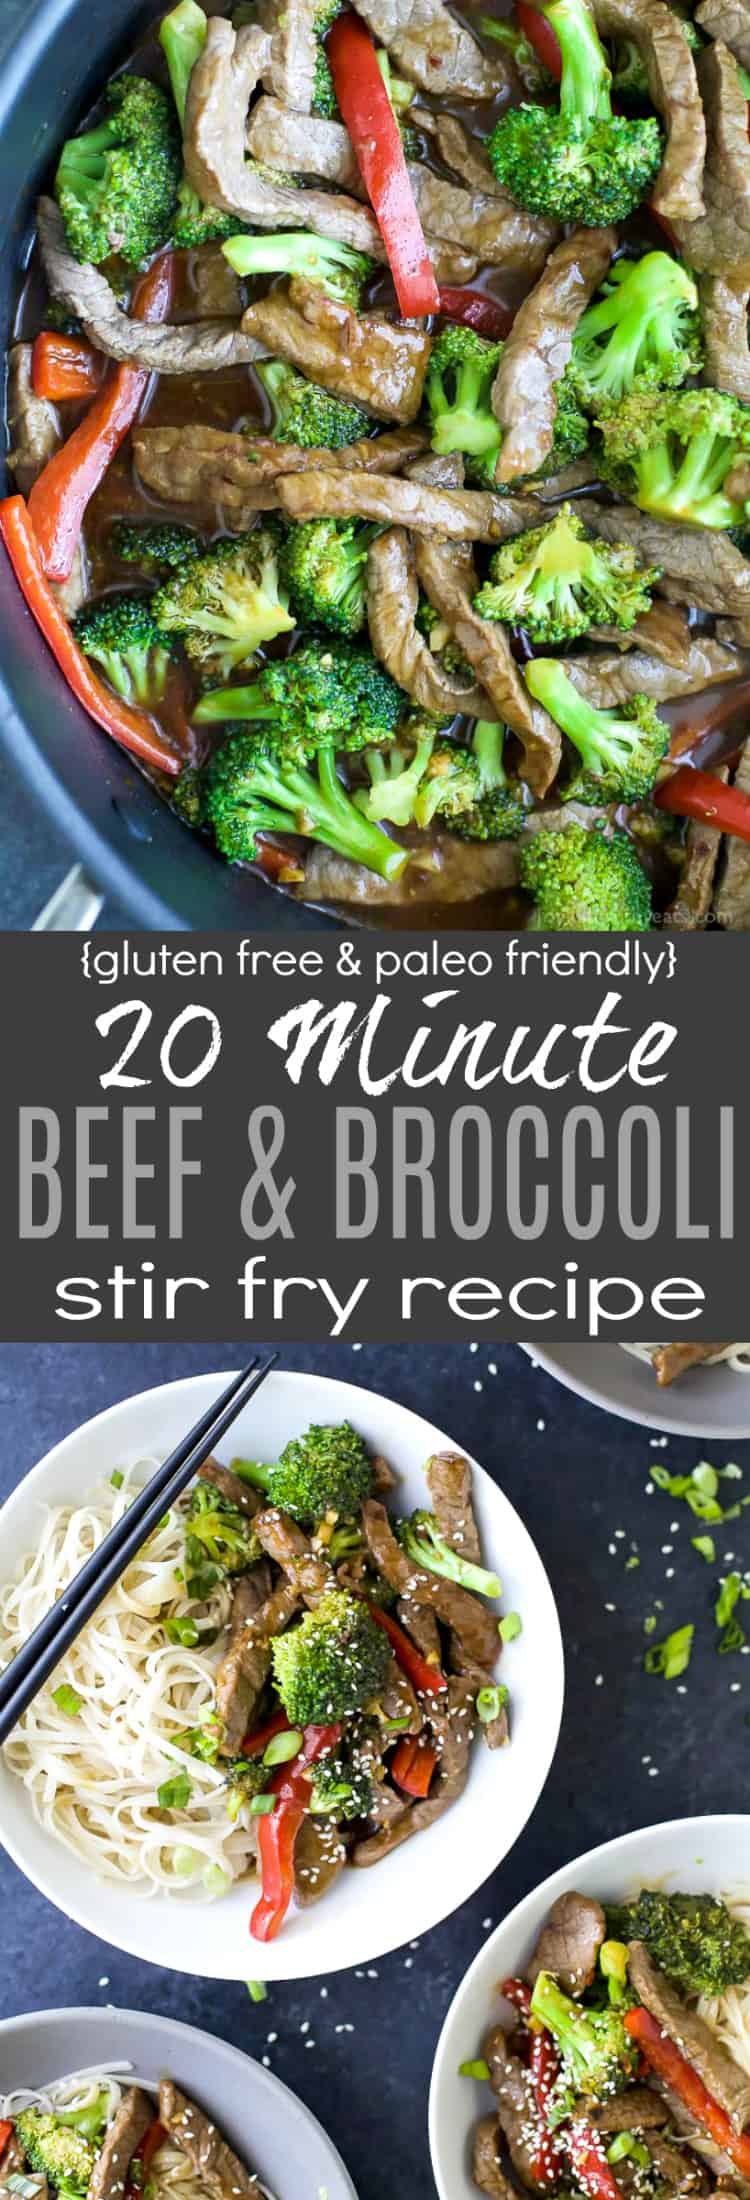 Easy 20 Minute Beef and Broccoli Stir Fry Recipe with tender steak, crunchy veggies and a sweet & spicy sauce you'll love! Forget takeout, this quick gluten free stir fry will be your new go to dinner!